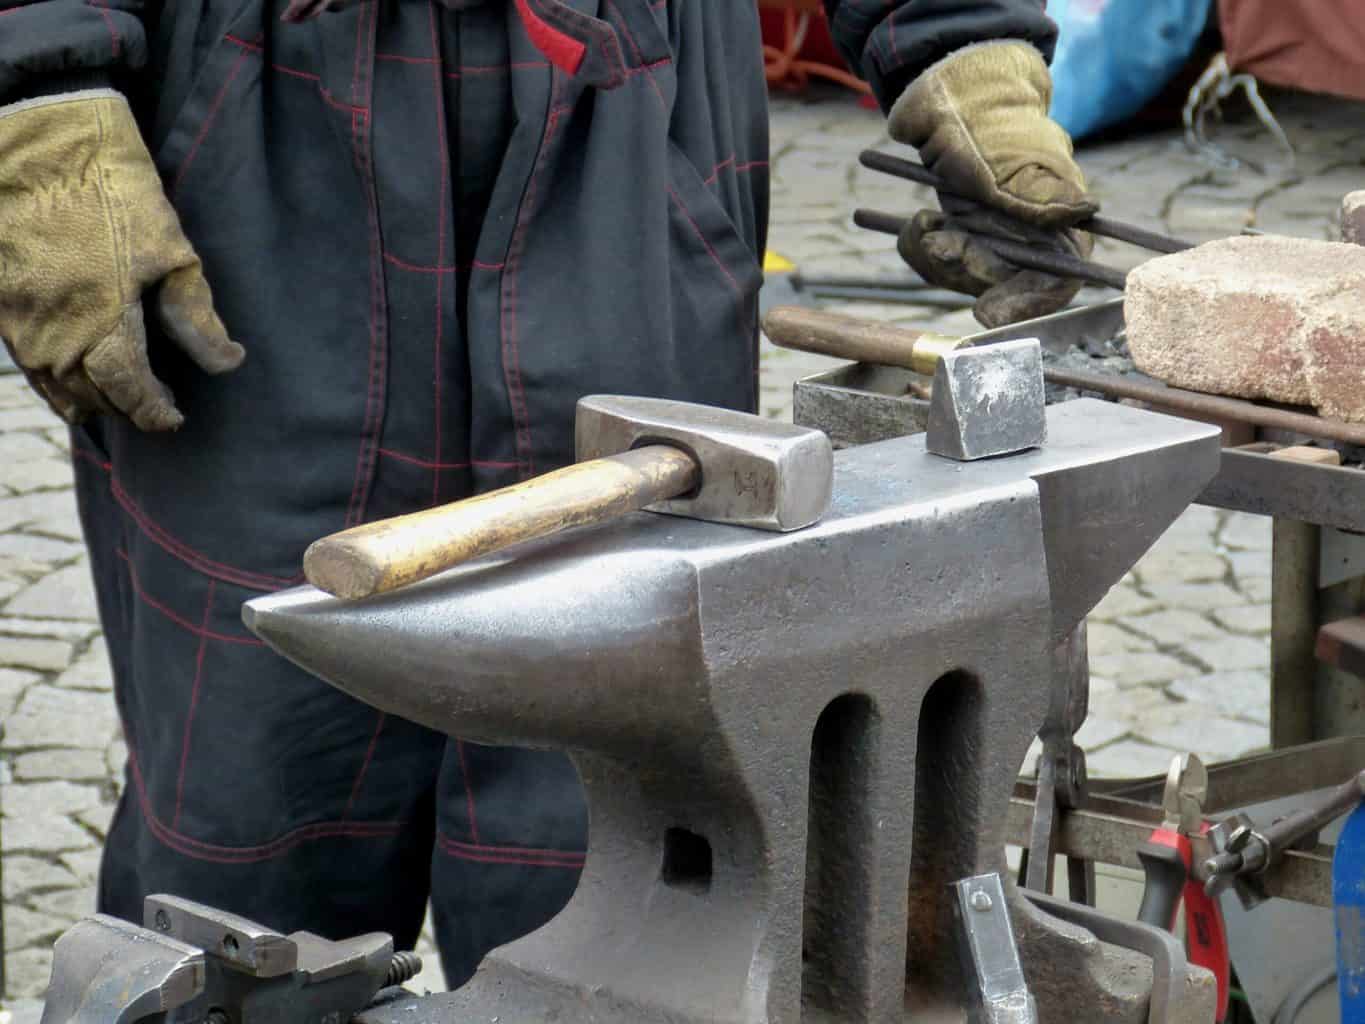 An anvil with hand tools on top